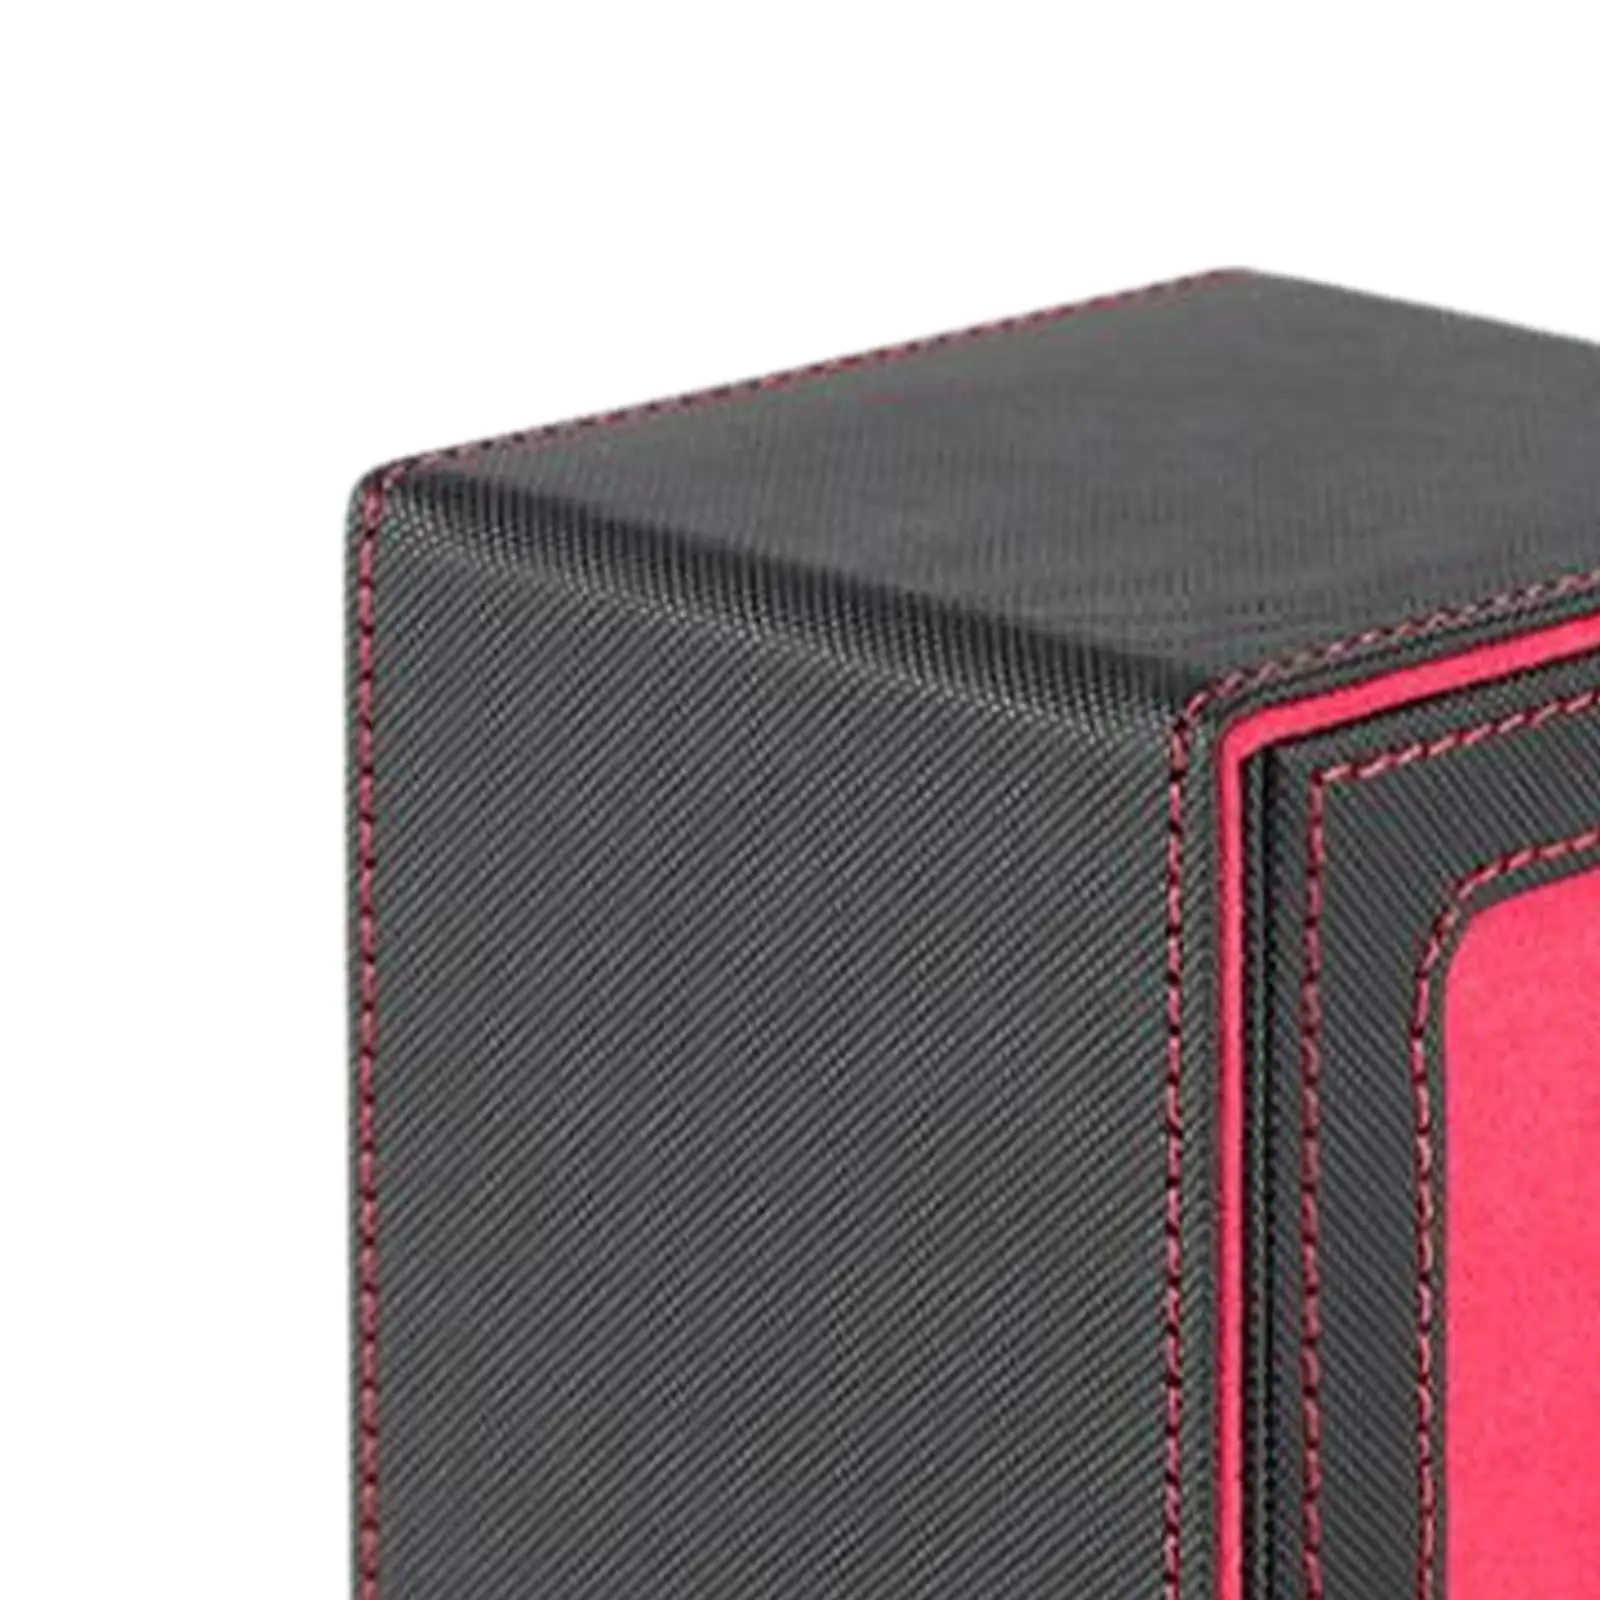 Card Deck Box with 2 Movable Dividers Display Protective Card Deck Case Holds